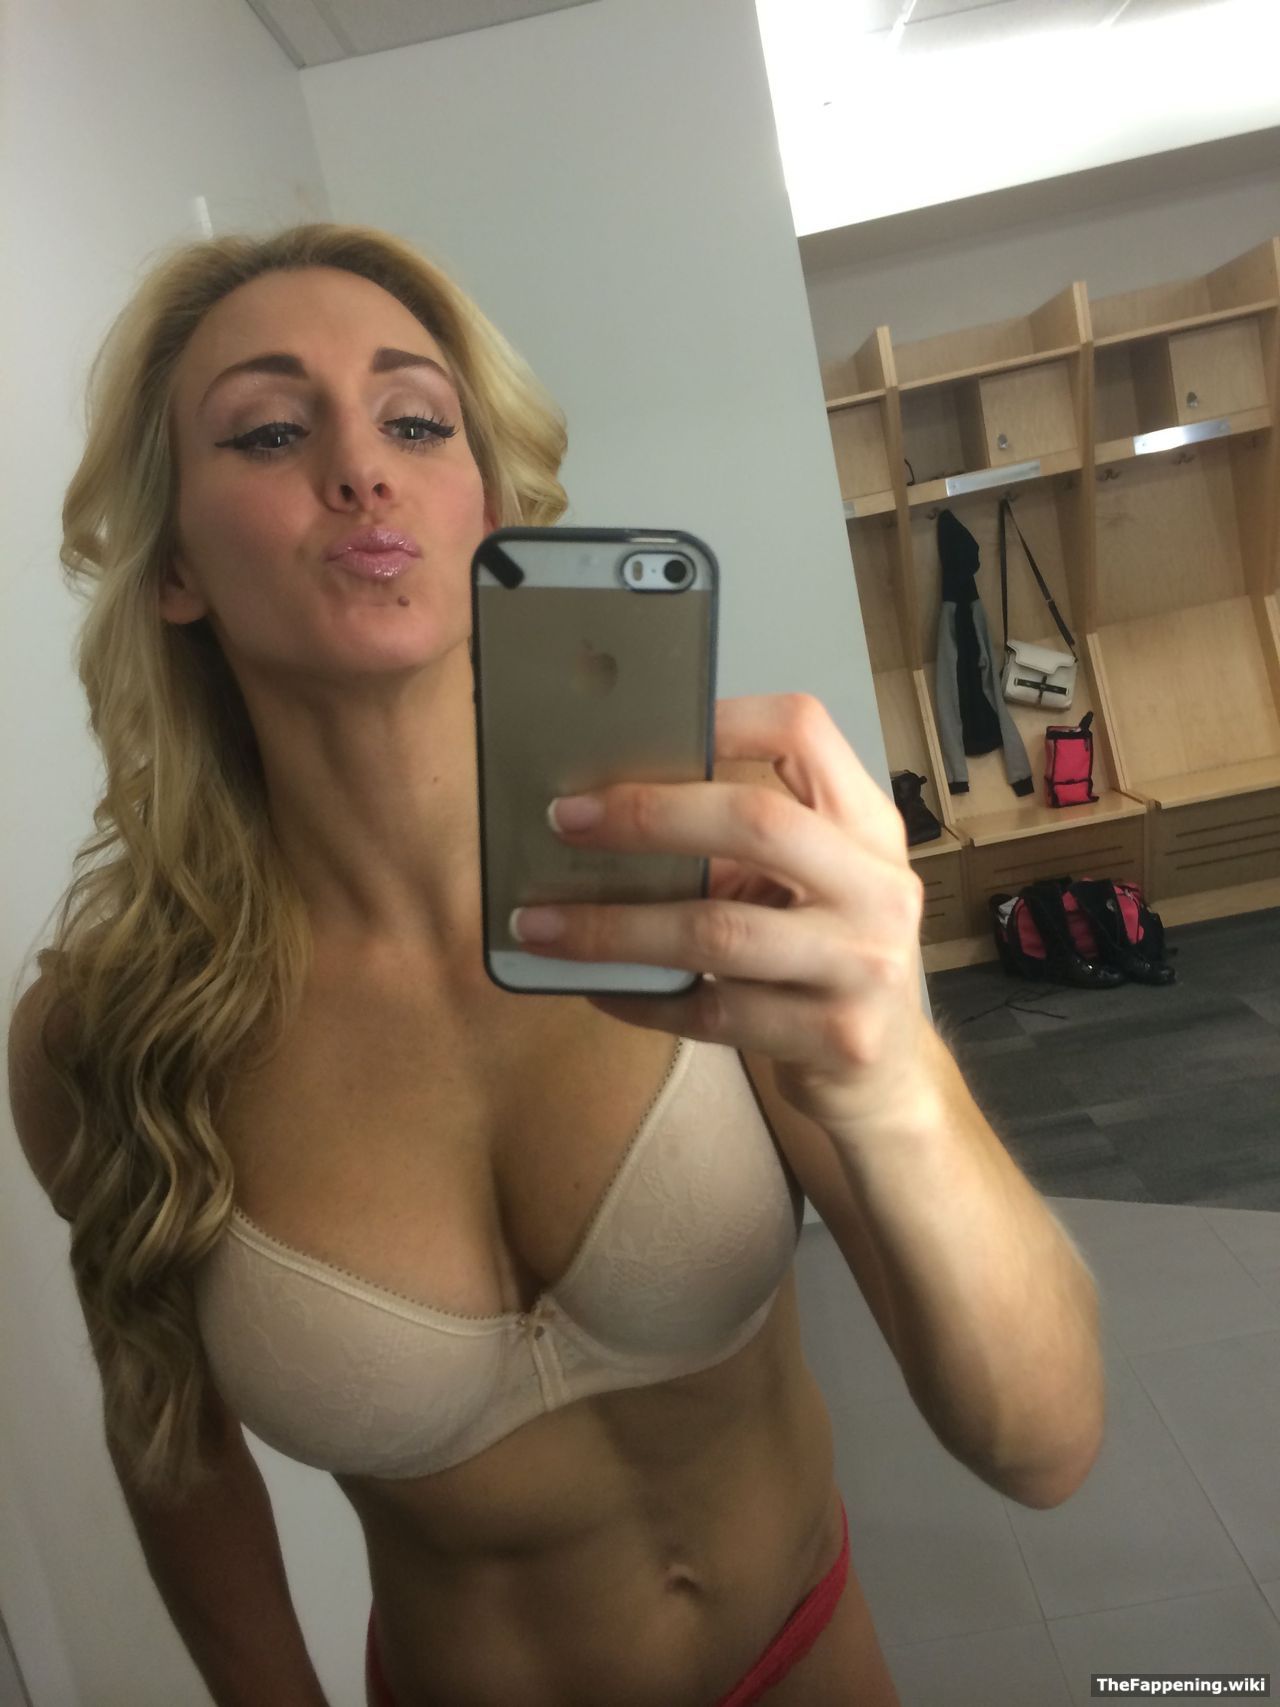 Charlotte Xxx - Charlotte Flair (WWE) Nude Pics & Vids - The Fappening